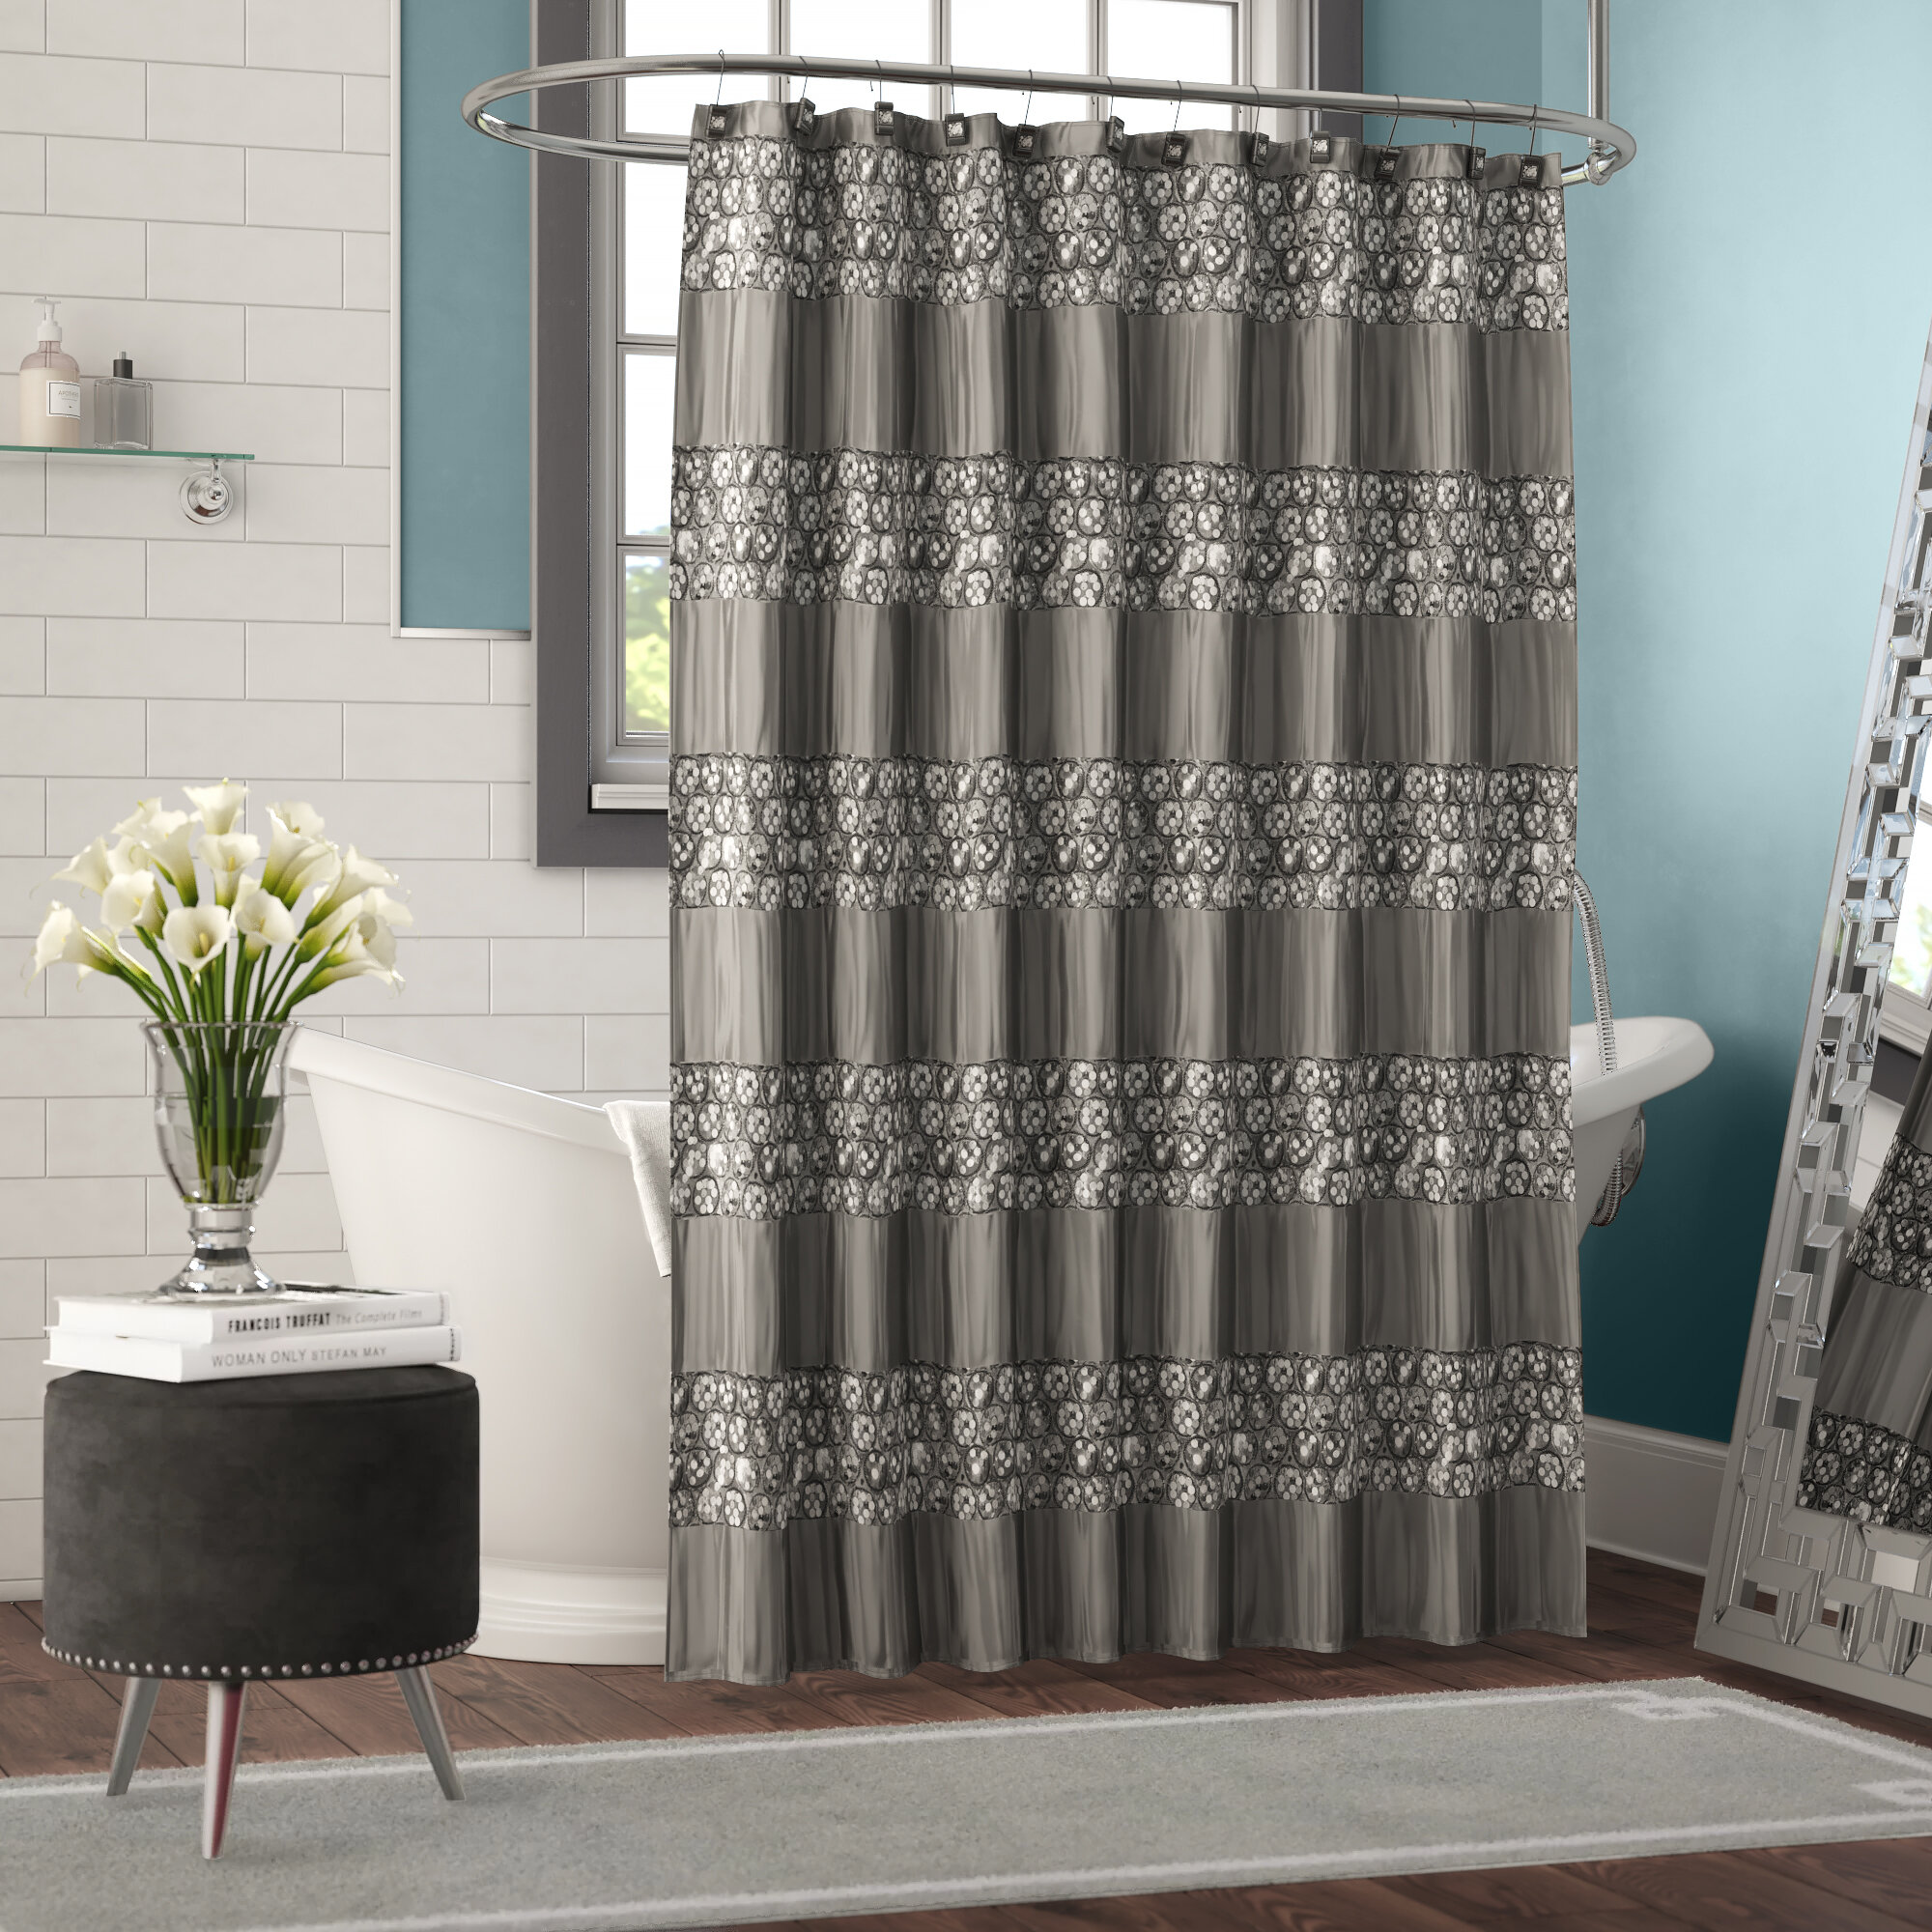 where to get shower curtains